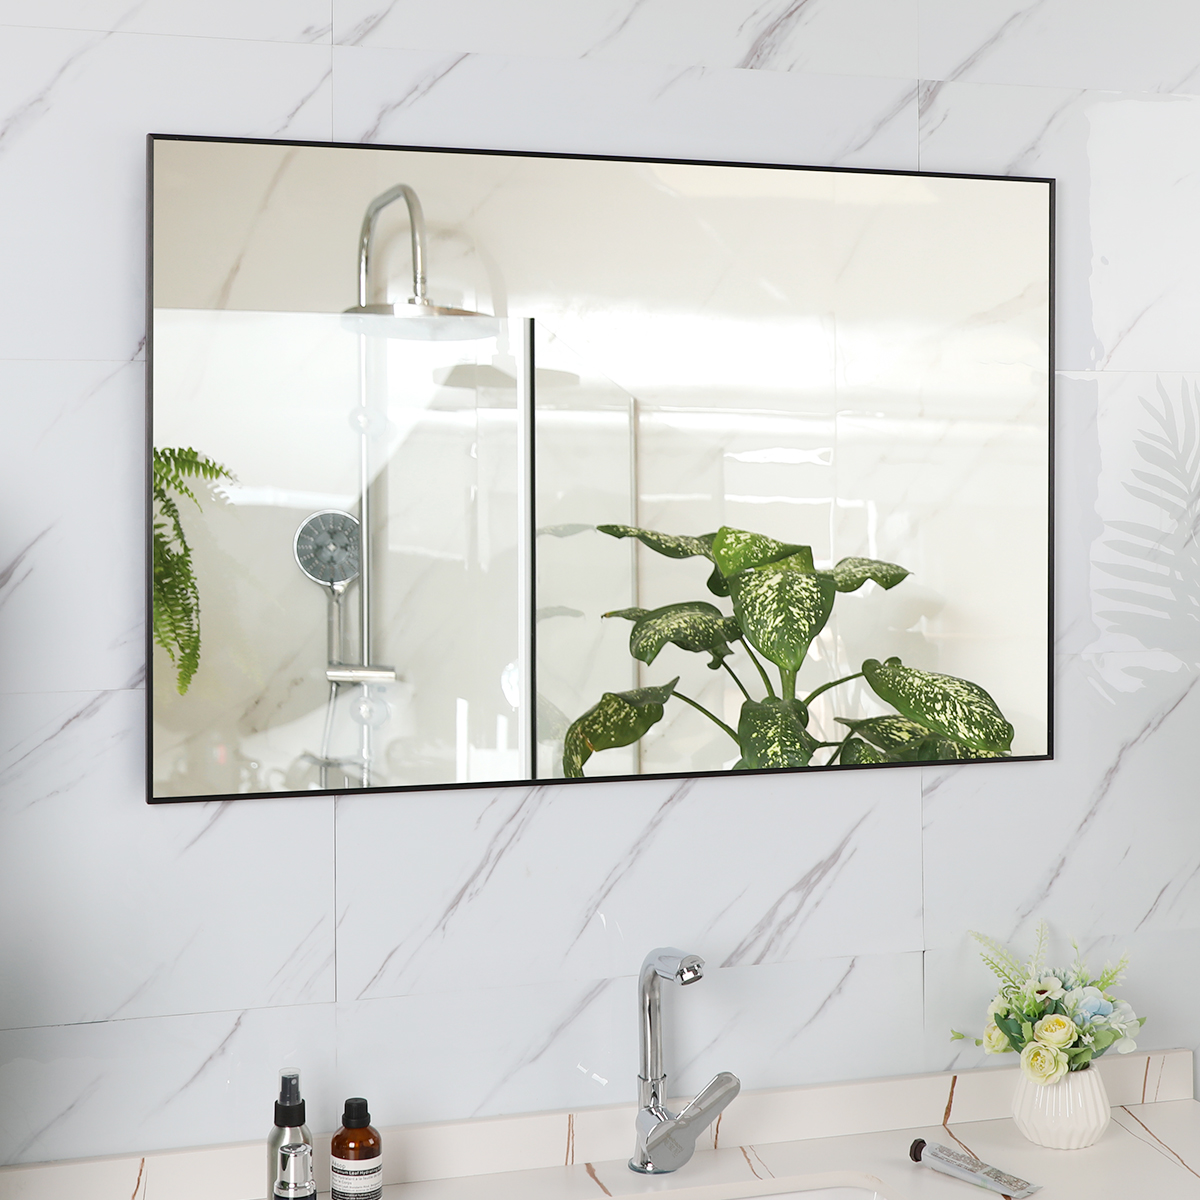 36x26 inches Modern Black Bathroom Mirror with Aluminum Frame Vertical or Horizontal Hanging Decorative Wall Mirrors for Living Room Bedroom-Boyel Living